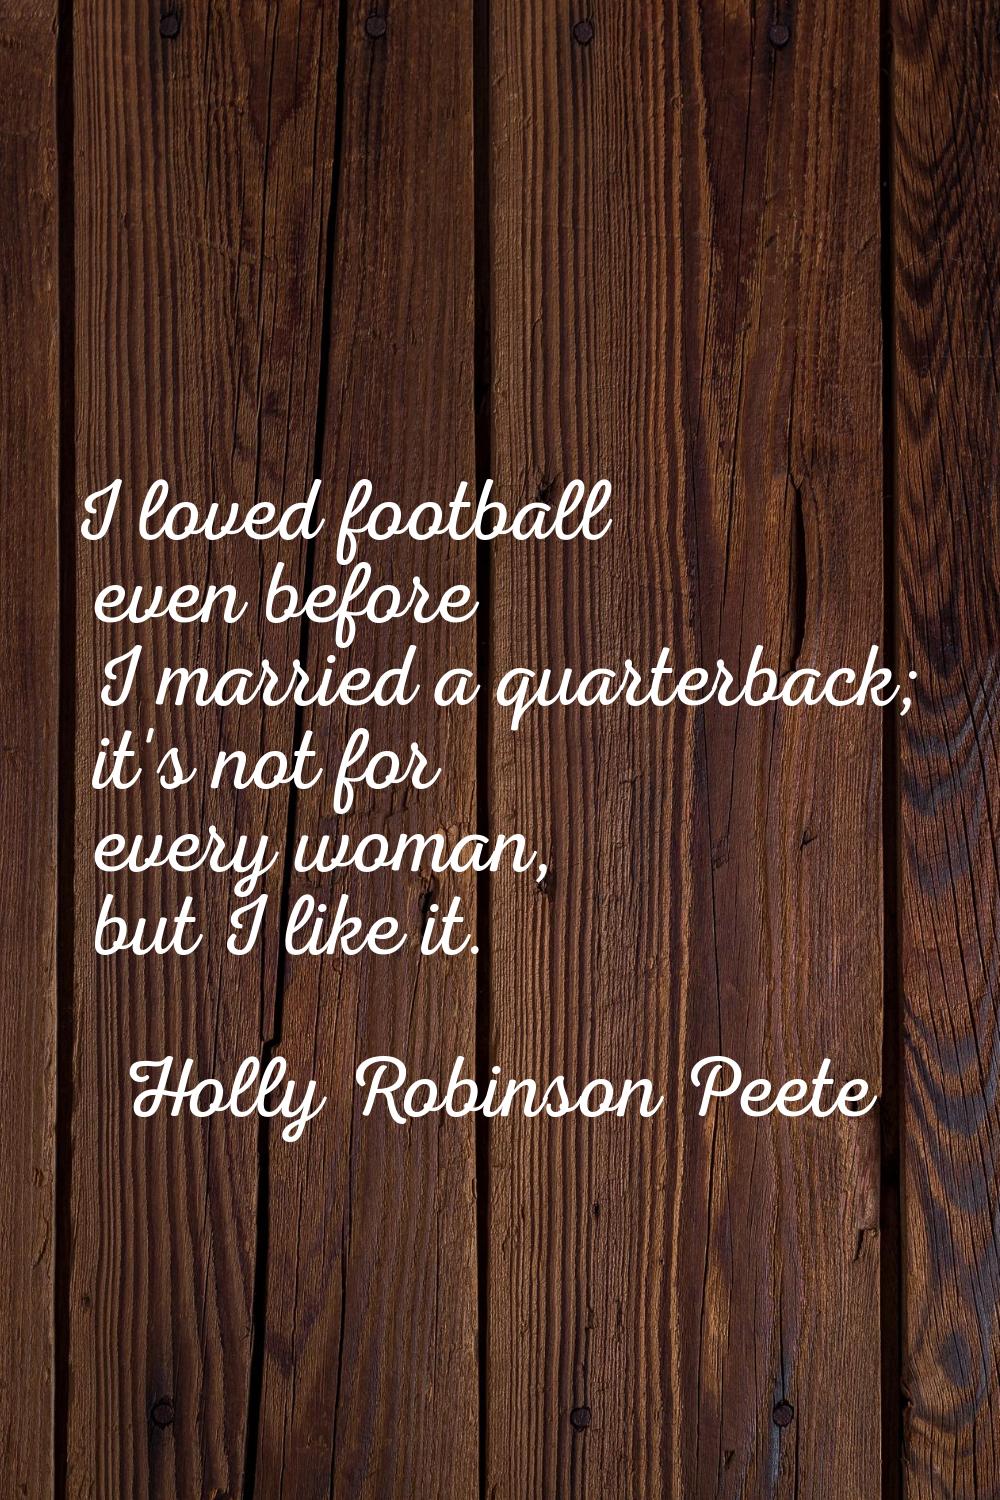 I loved football even before I married a quarterback; it's not for every woman, but I like it.